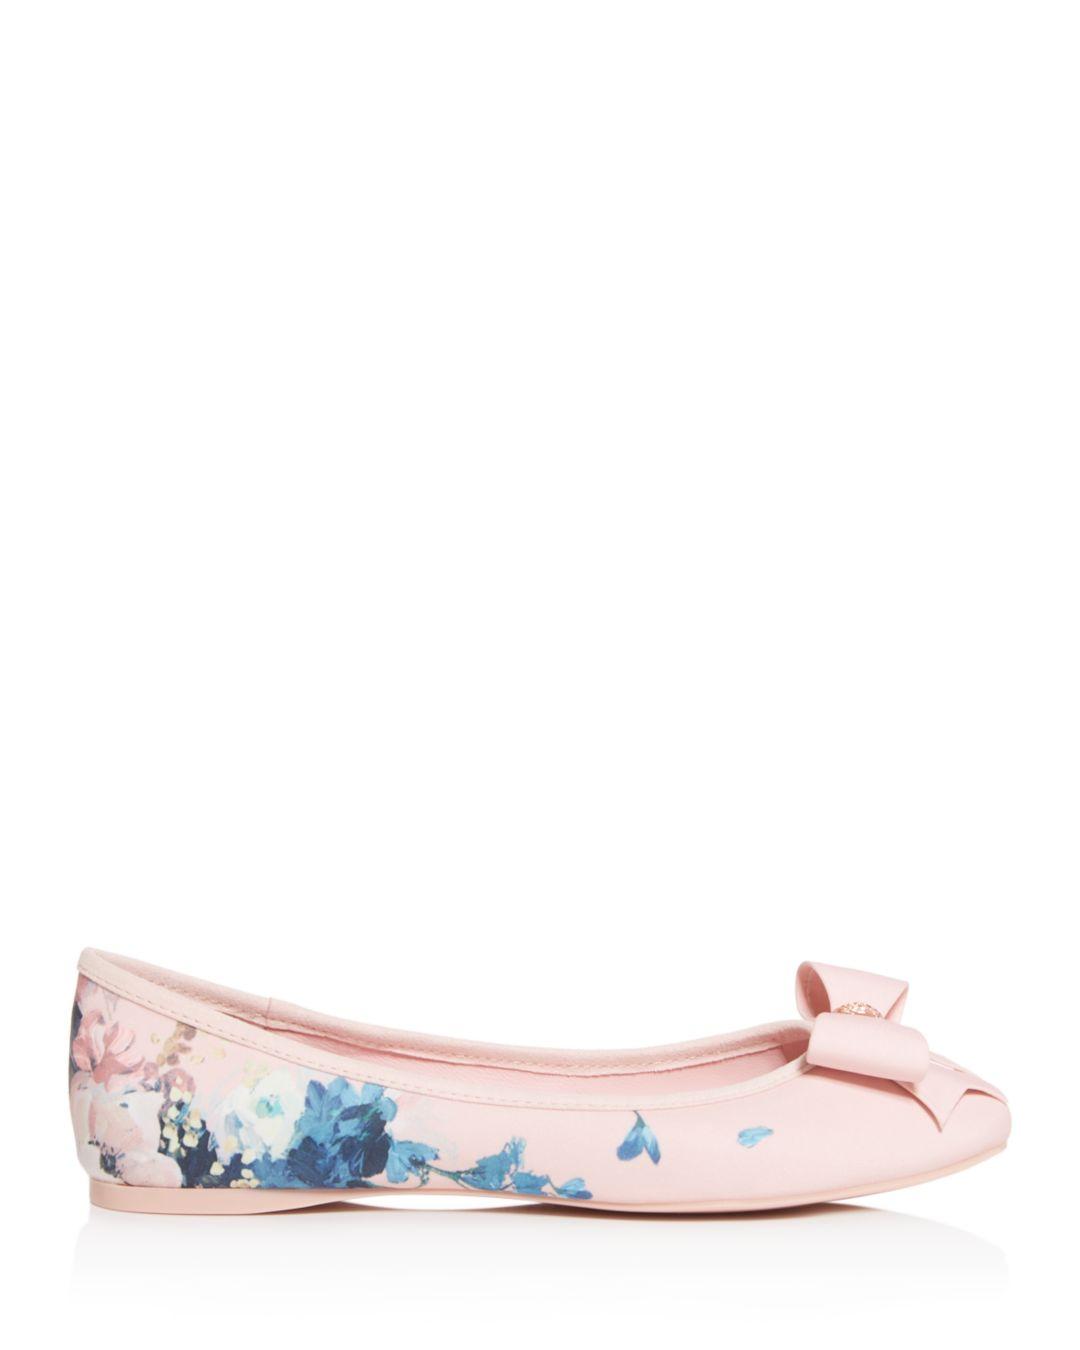 Ted Baker Immep Floral Ballet Flats in Pink | Lyst